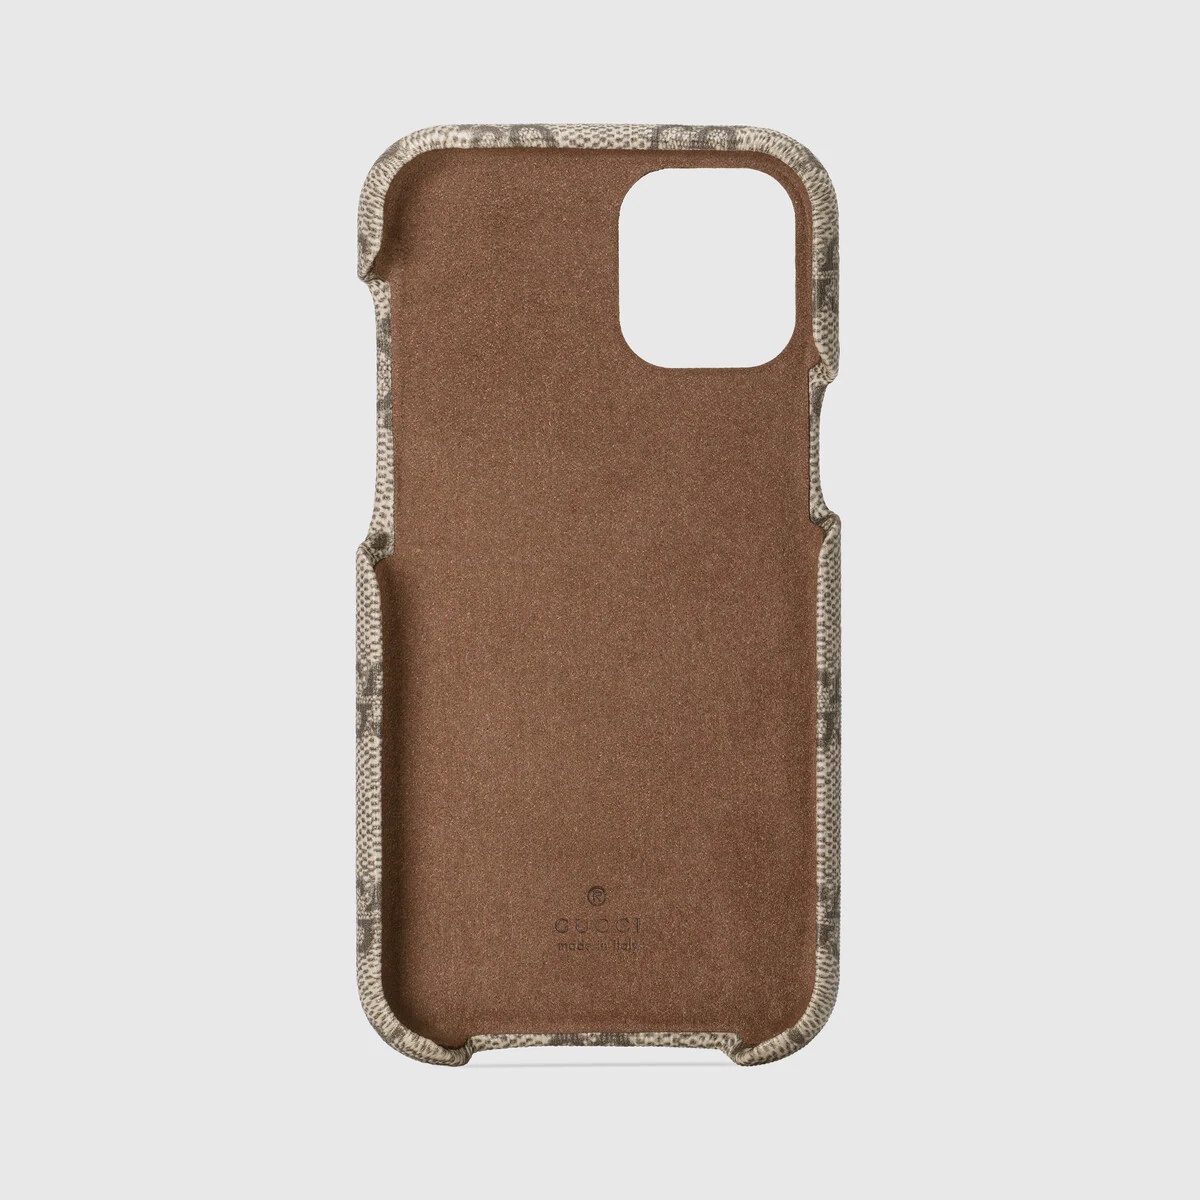 Ophidia case for iPhone 12 mini - 2